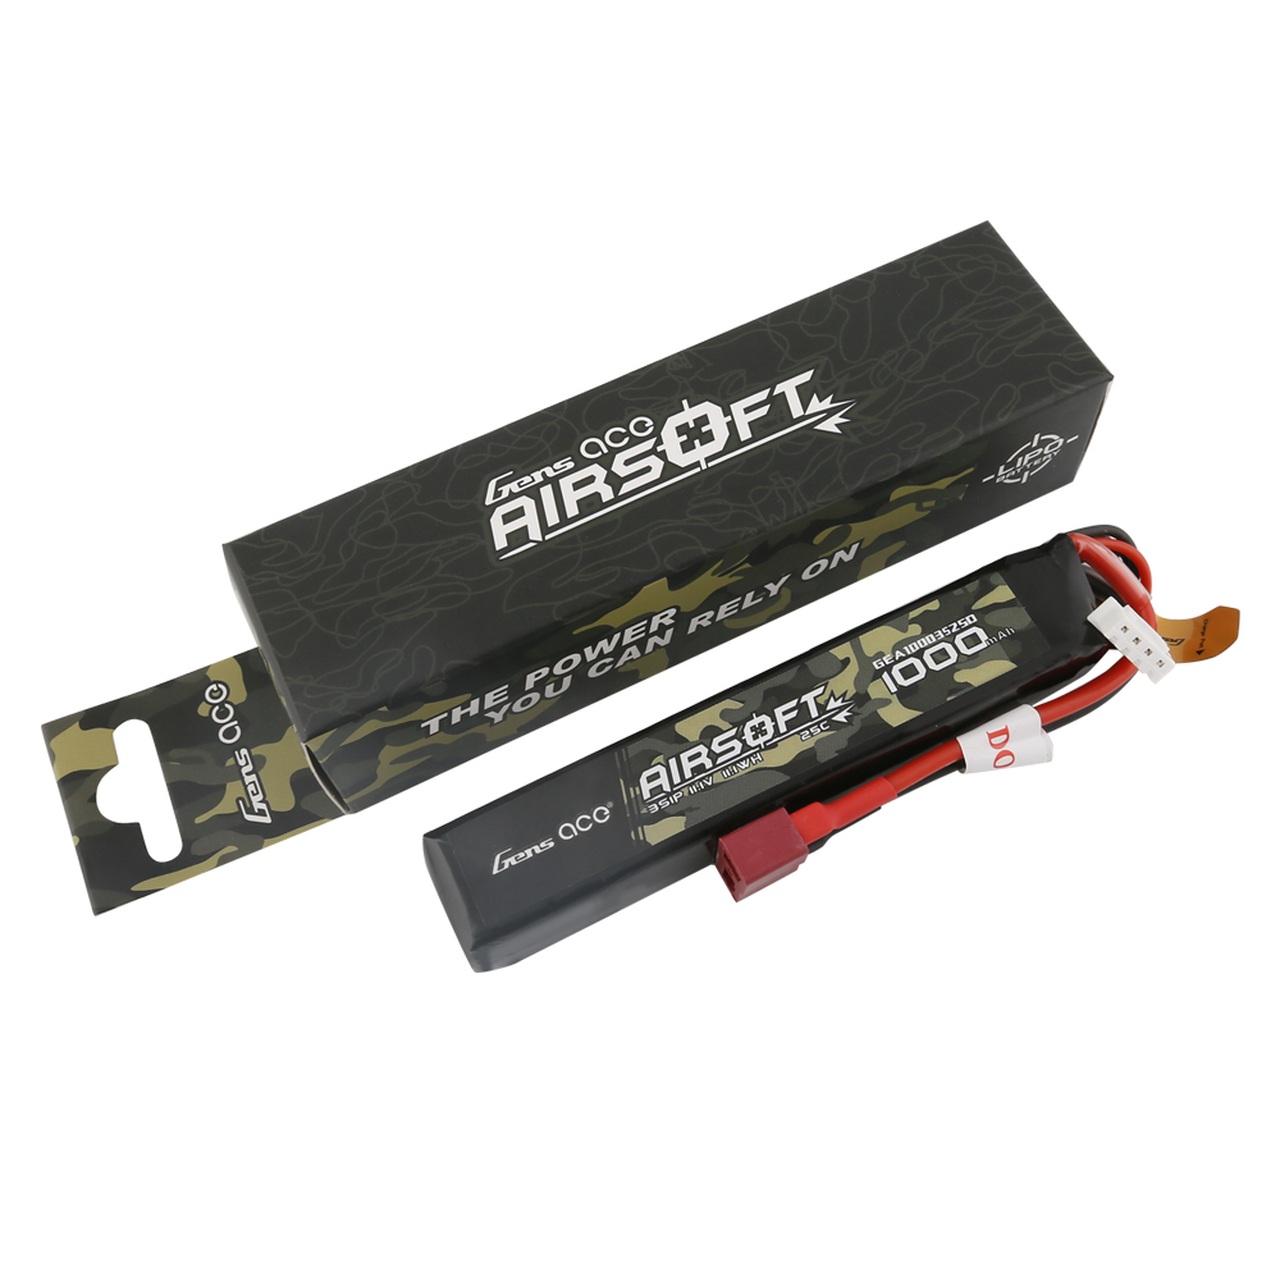 Gens ace 25C 1000mAh 3S1P 11.1V Airsoft Gun Battery with Deans Plug